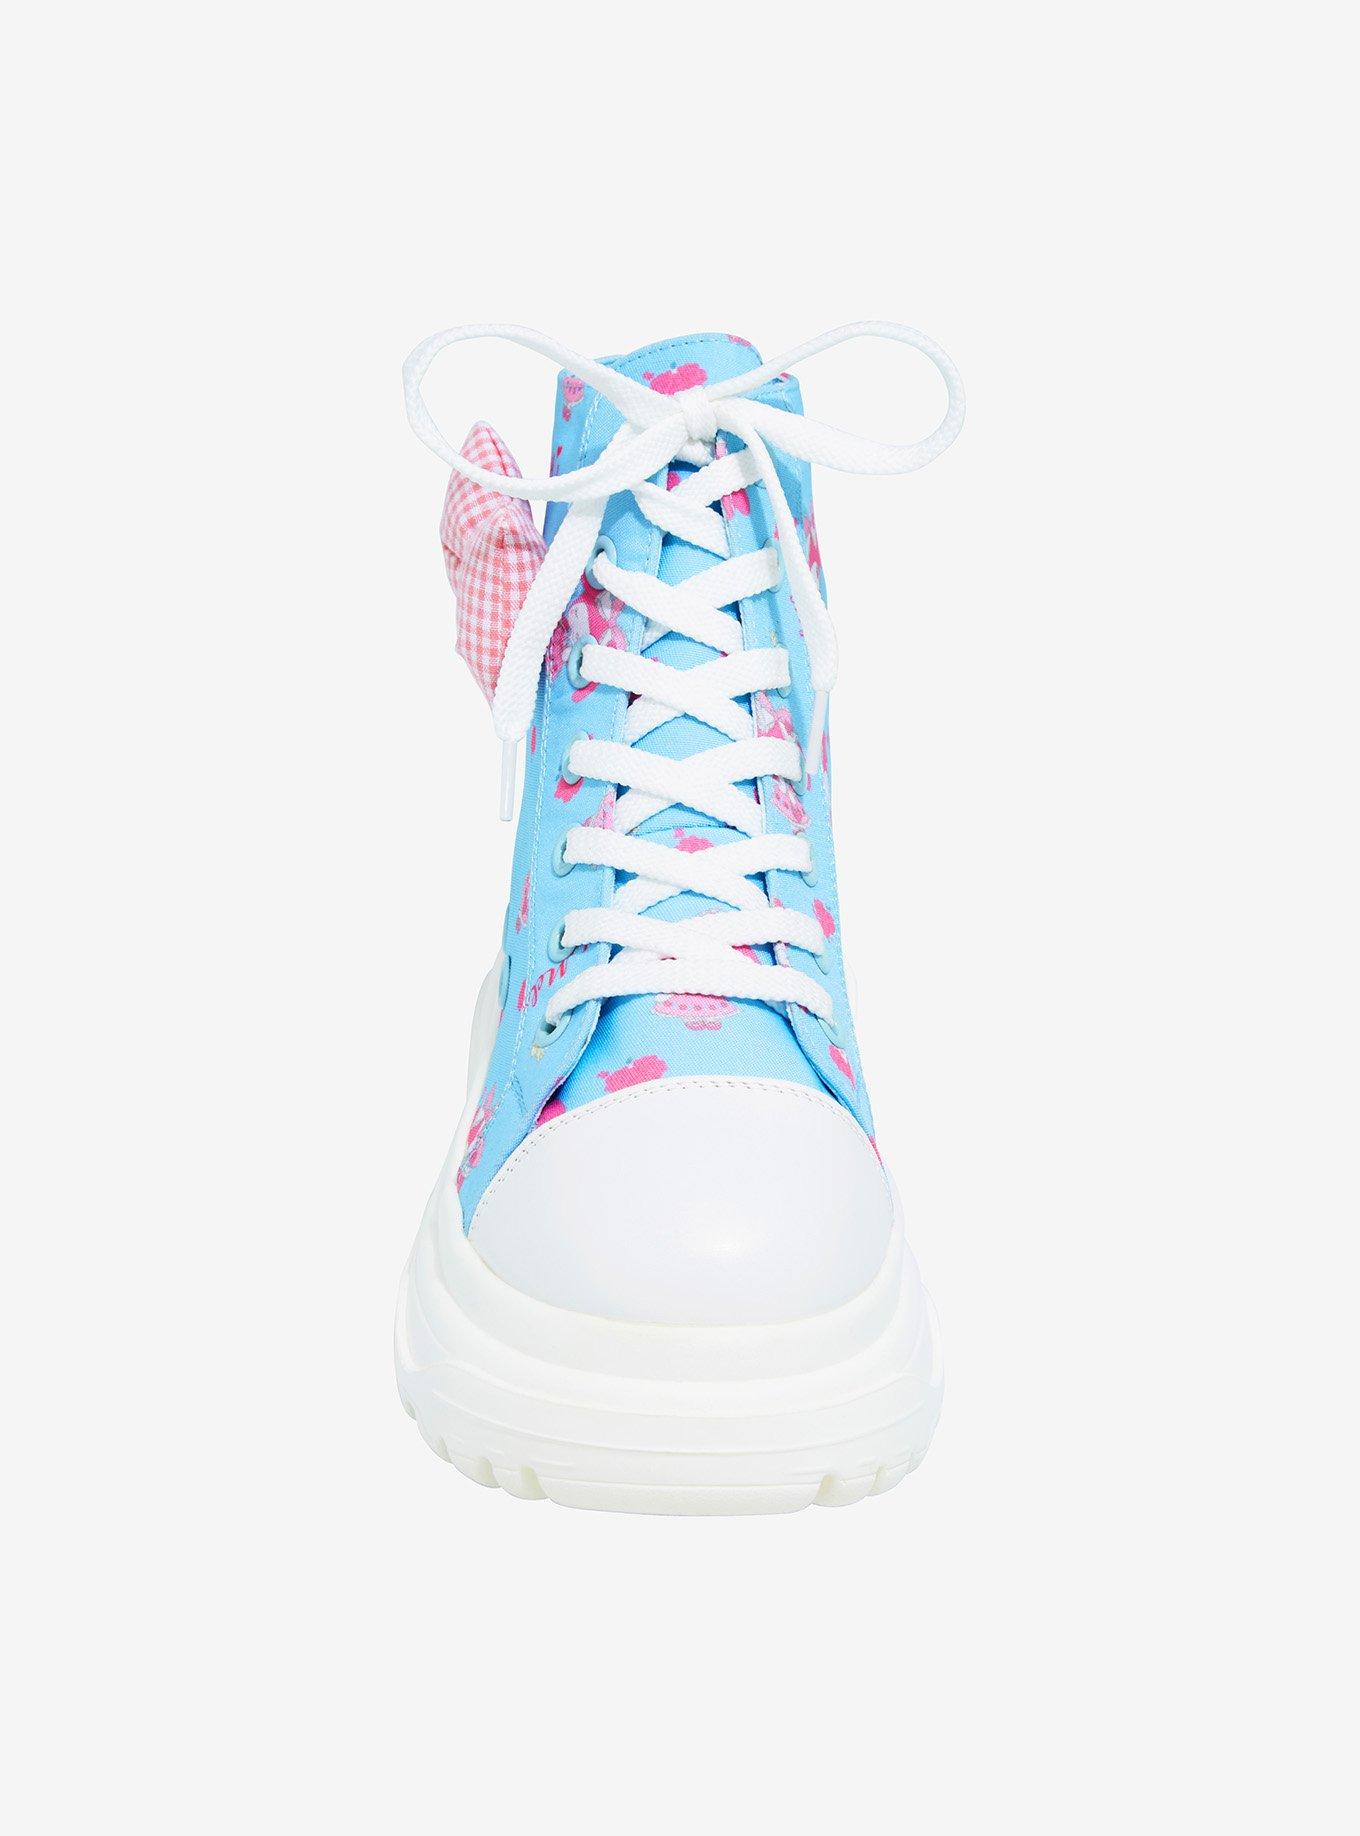 My Melody Bows High-Top Platform Sneakers, MULTI, alternate